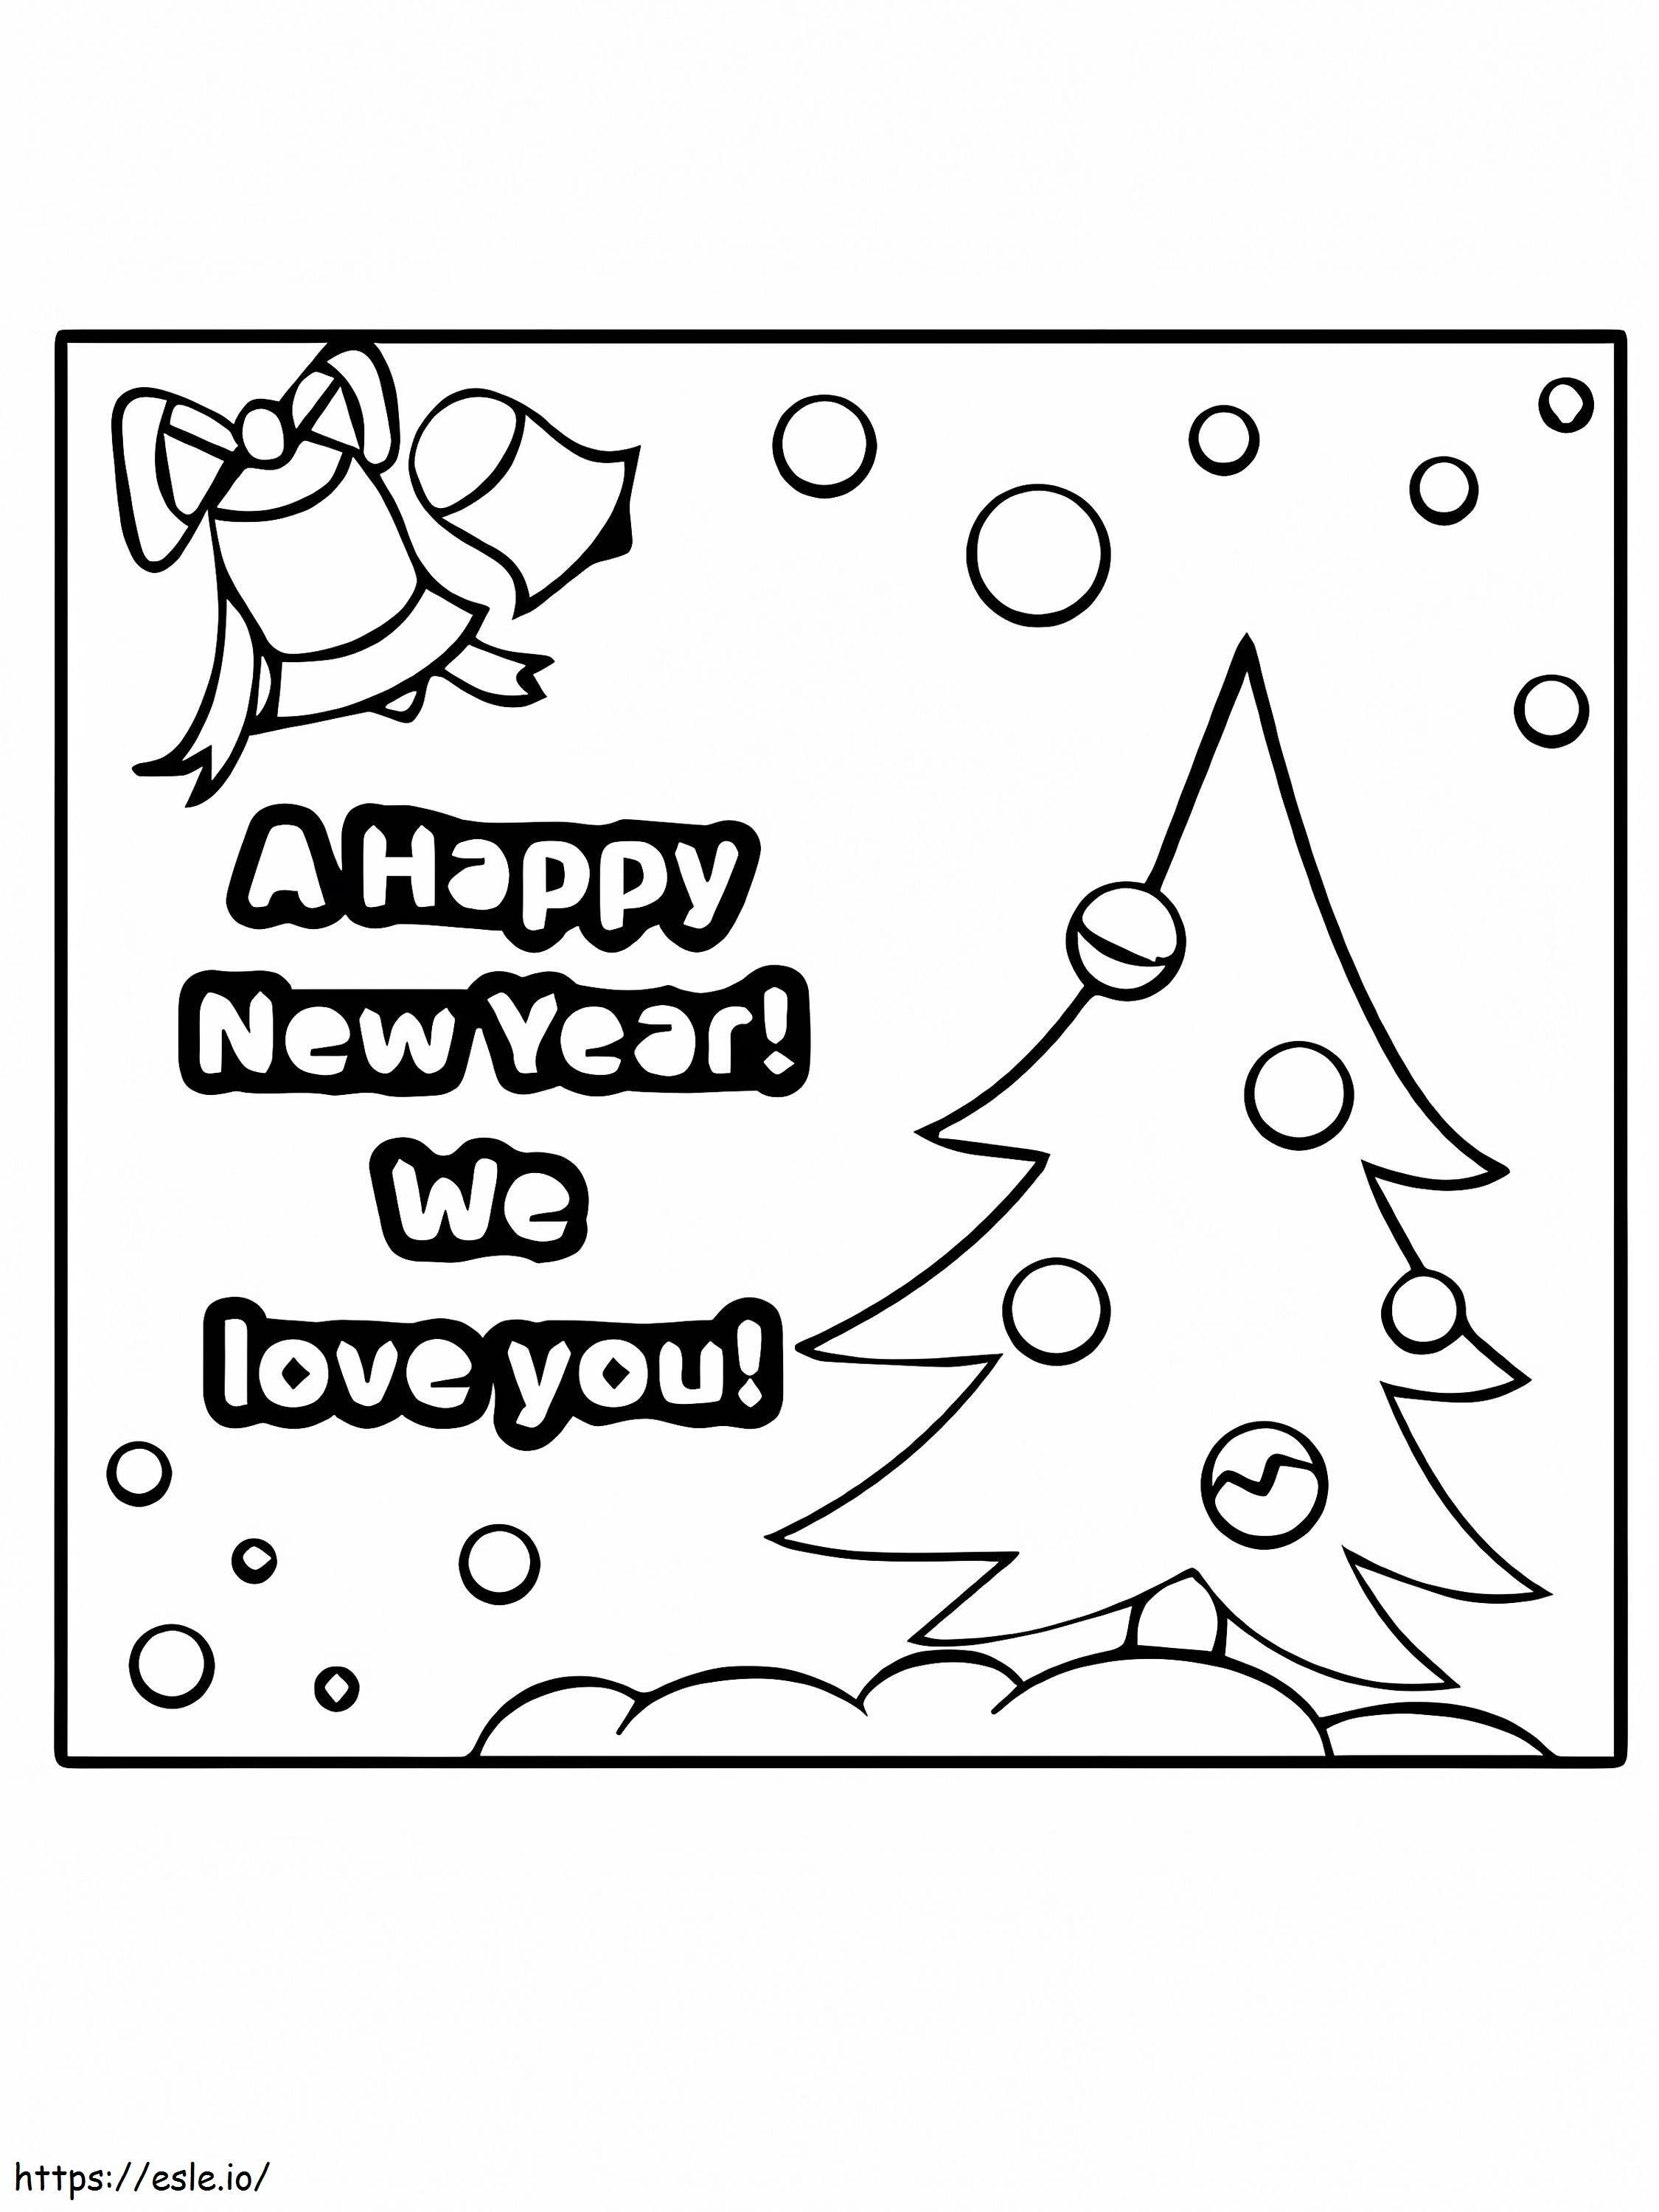 Happy New Year Bells And Tree Coloring Page coloring page